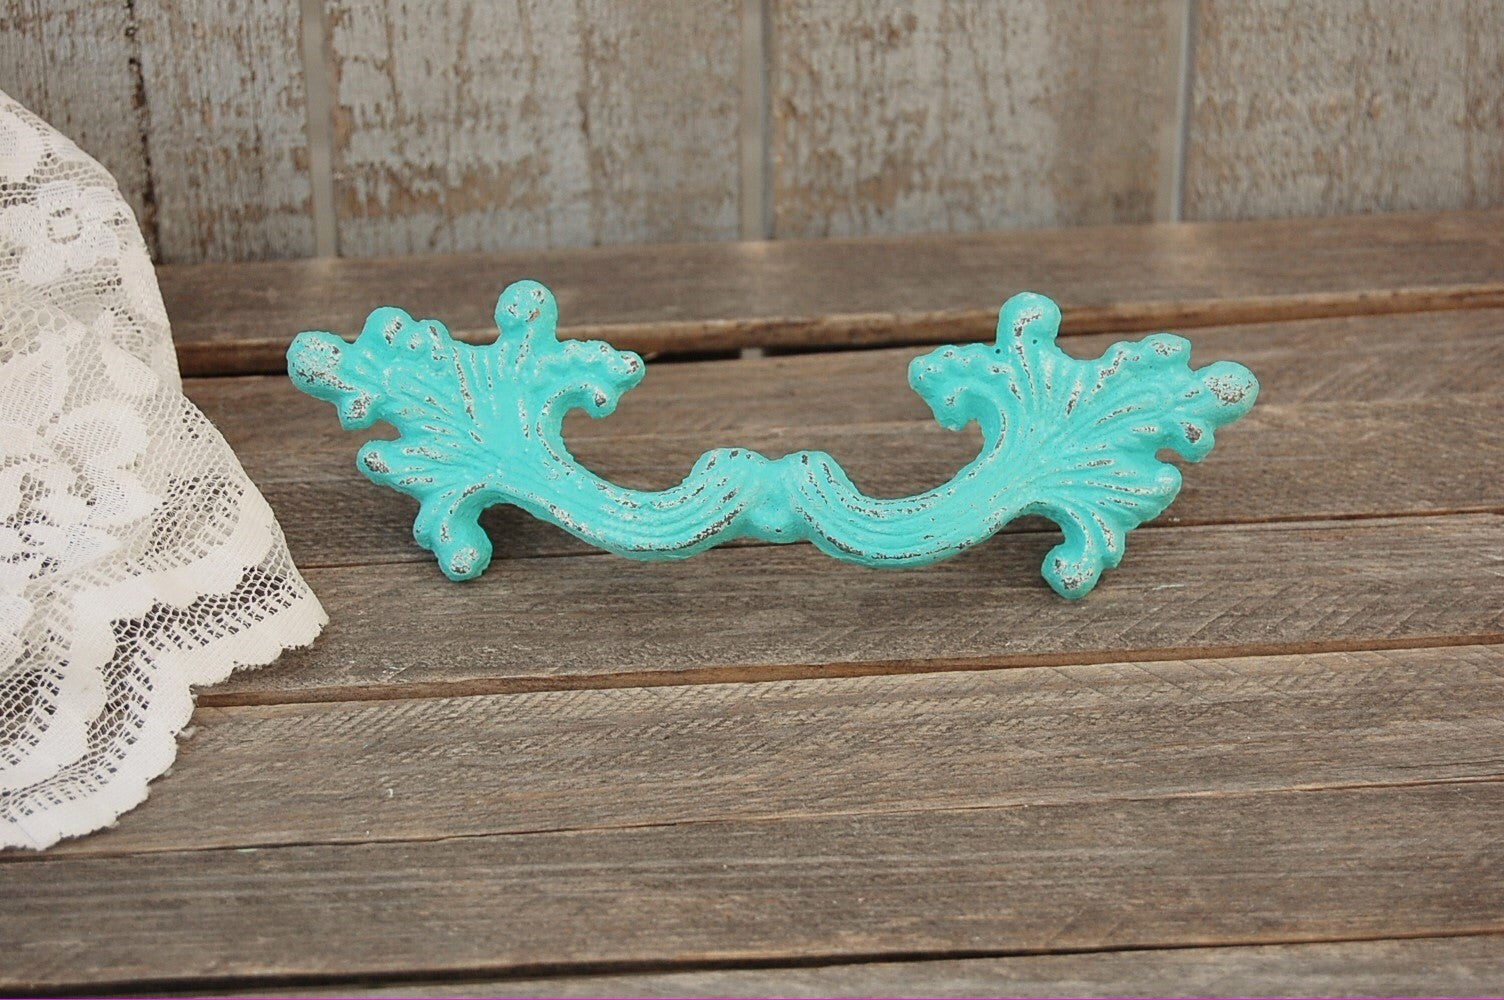 Aqua French provincial drawer pulls - The Vintage Artistry